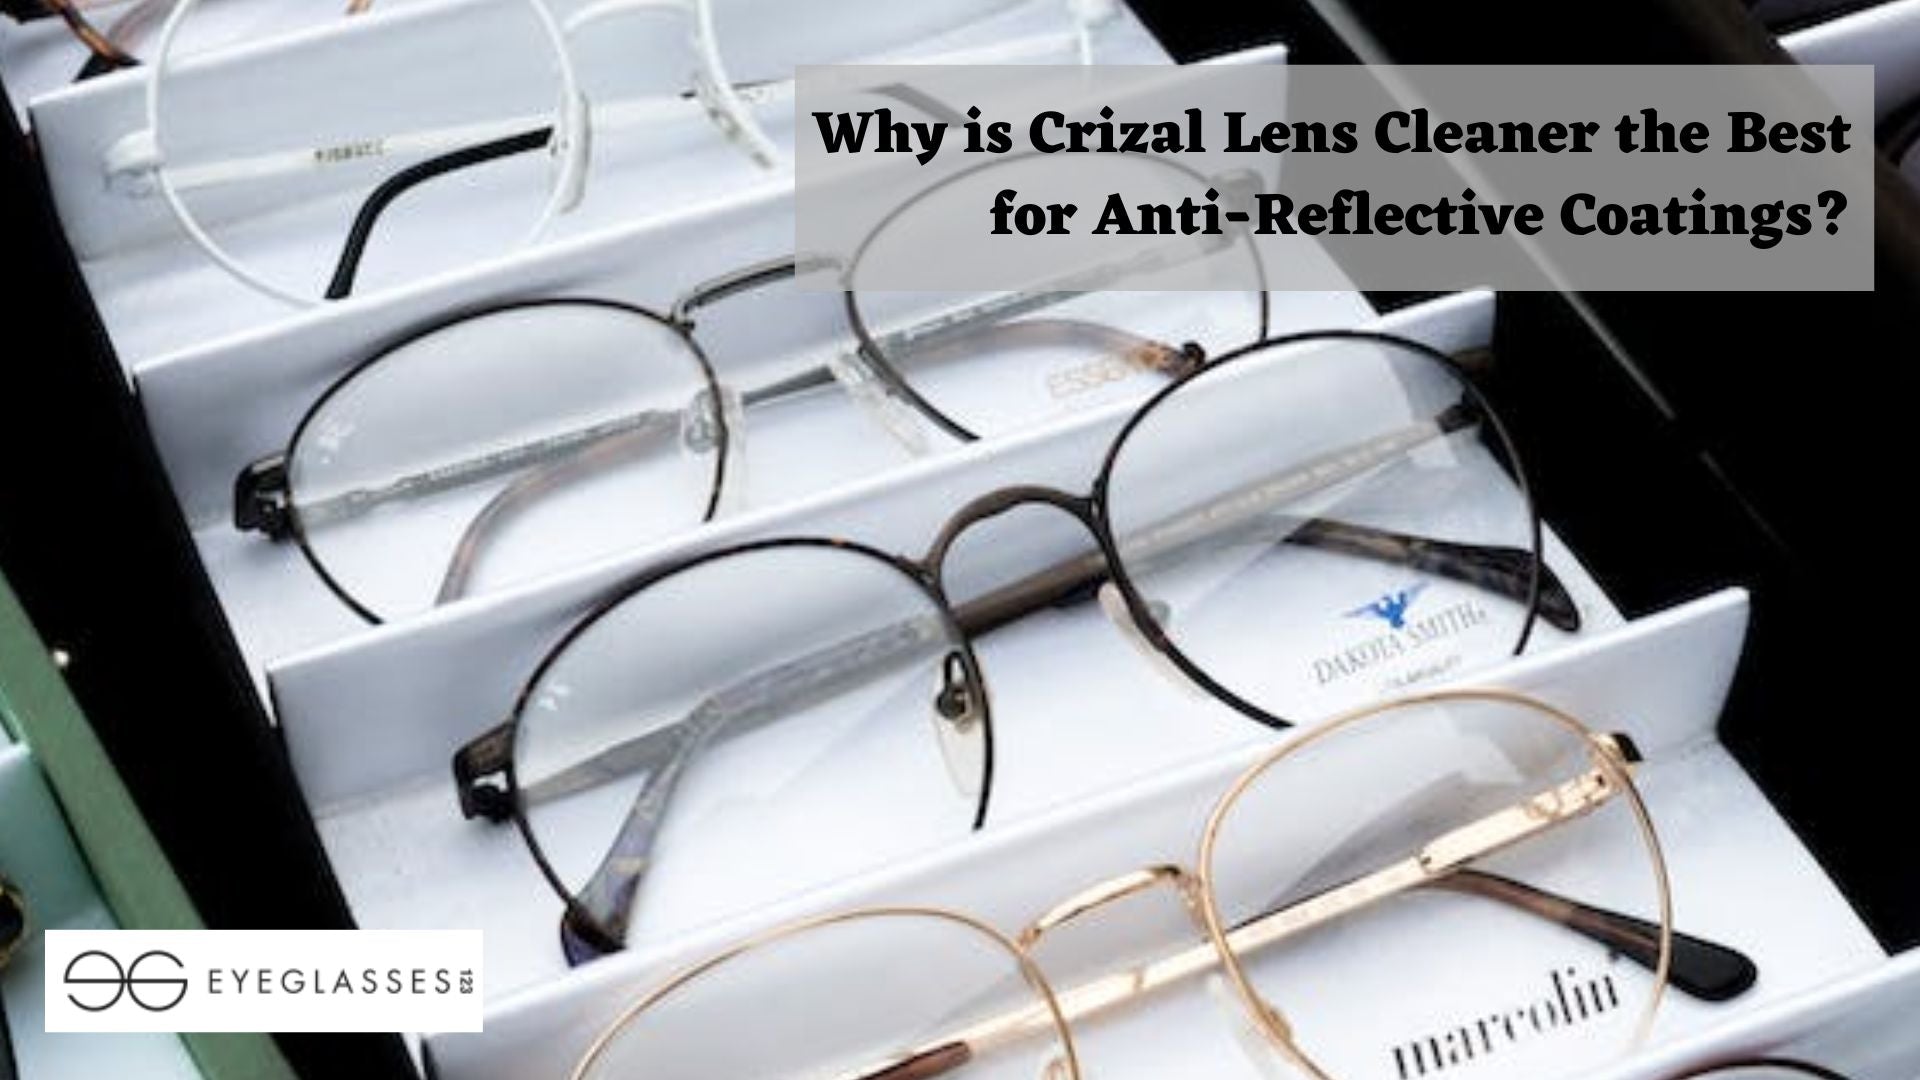 Why is Crizal Lens Cleaner the Best for Anti-Reflective Coatings?